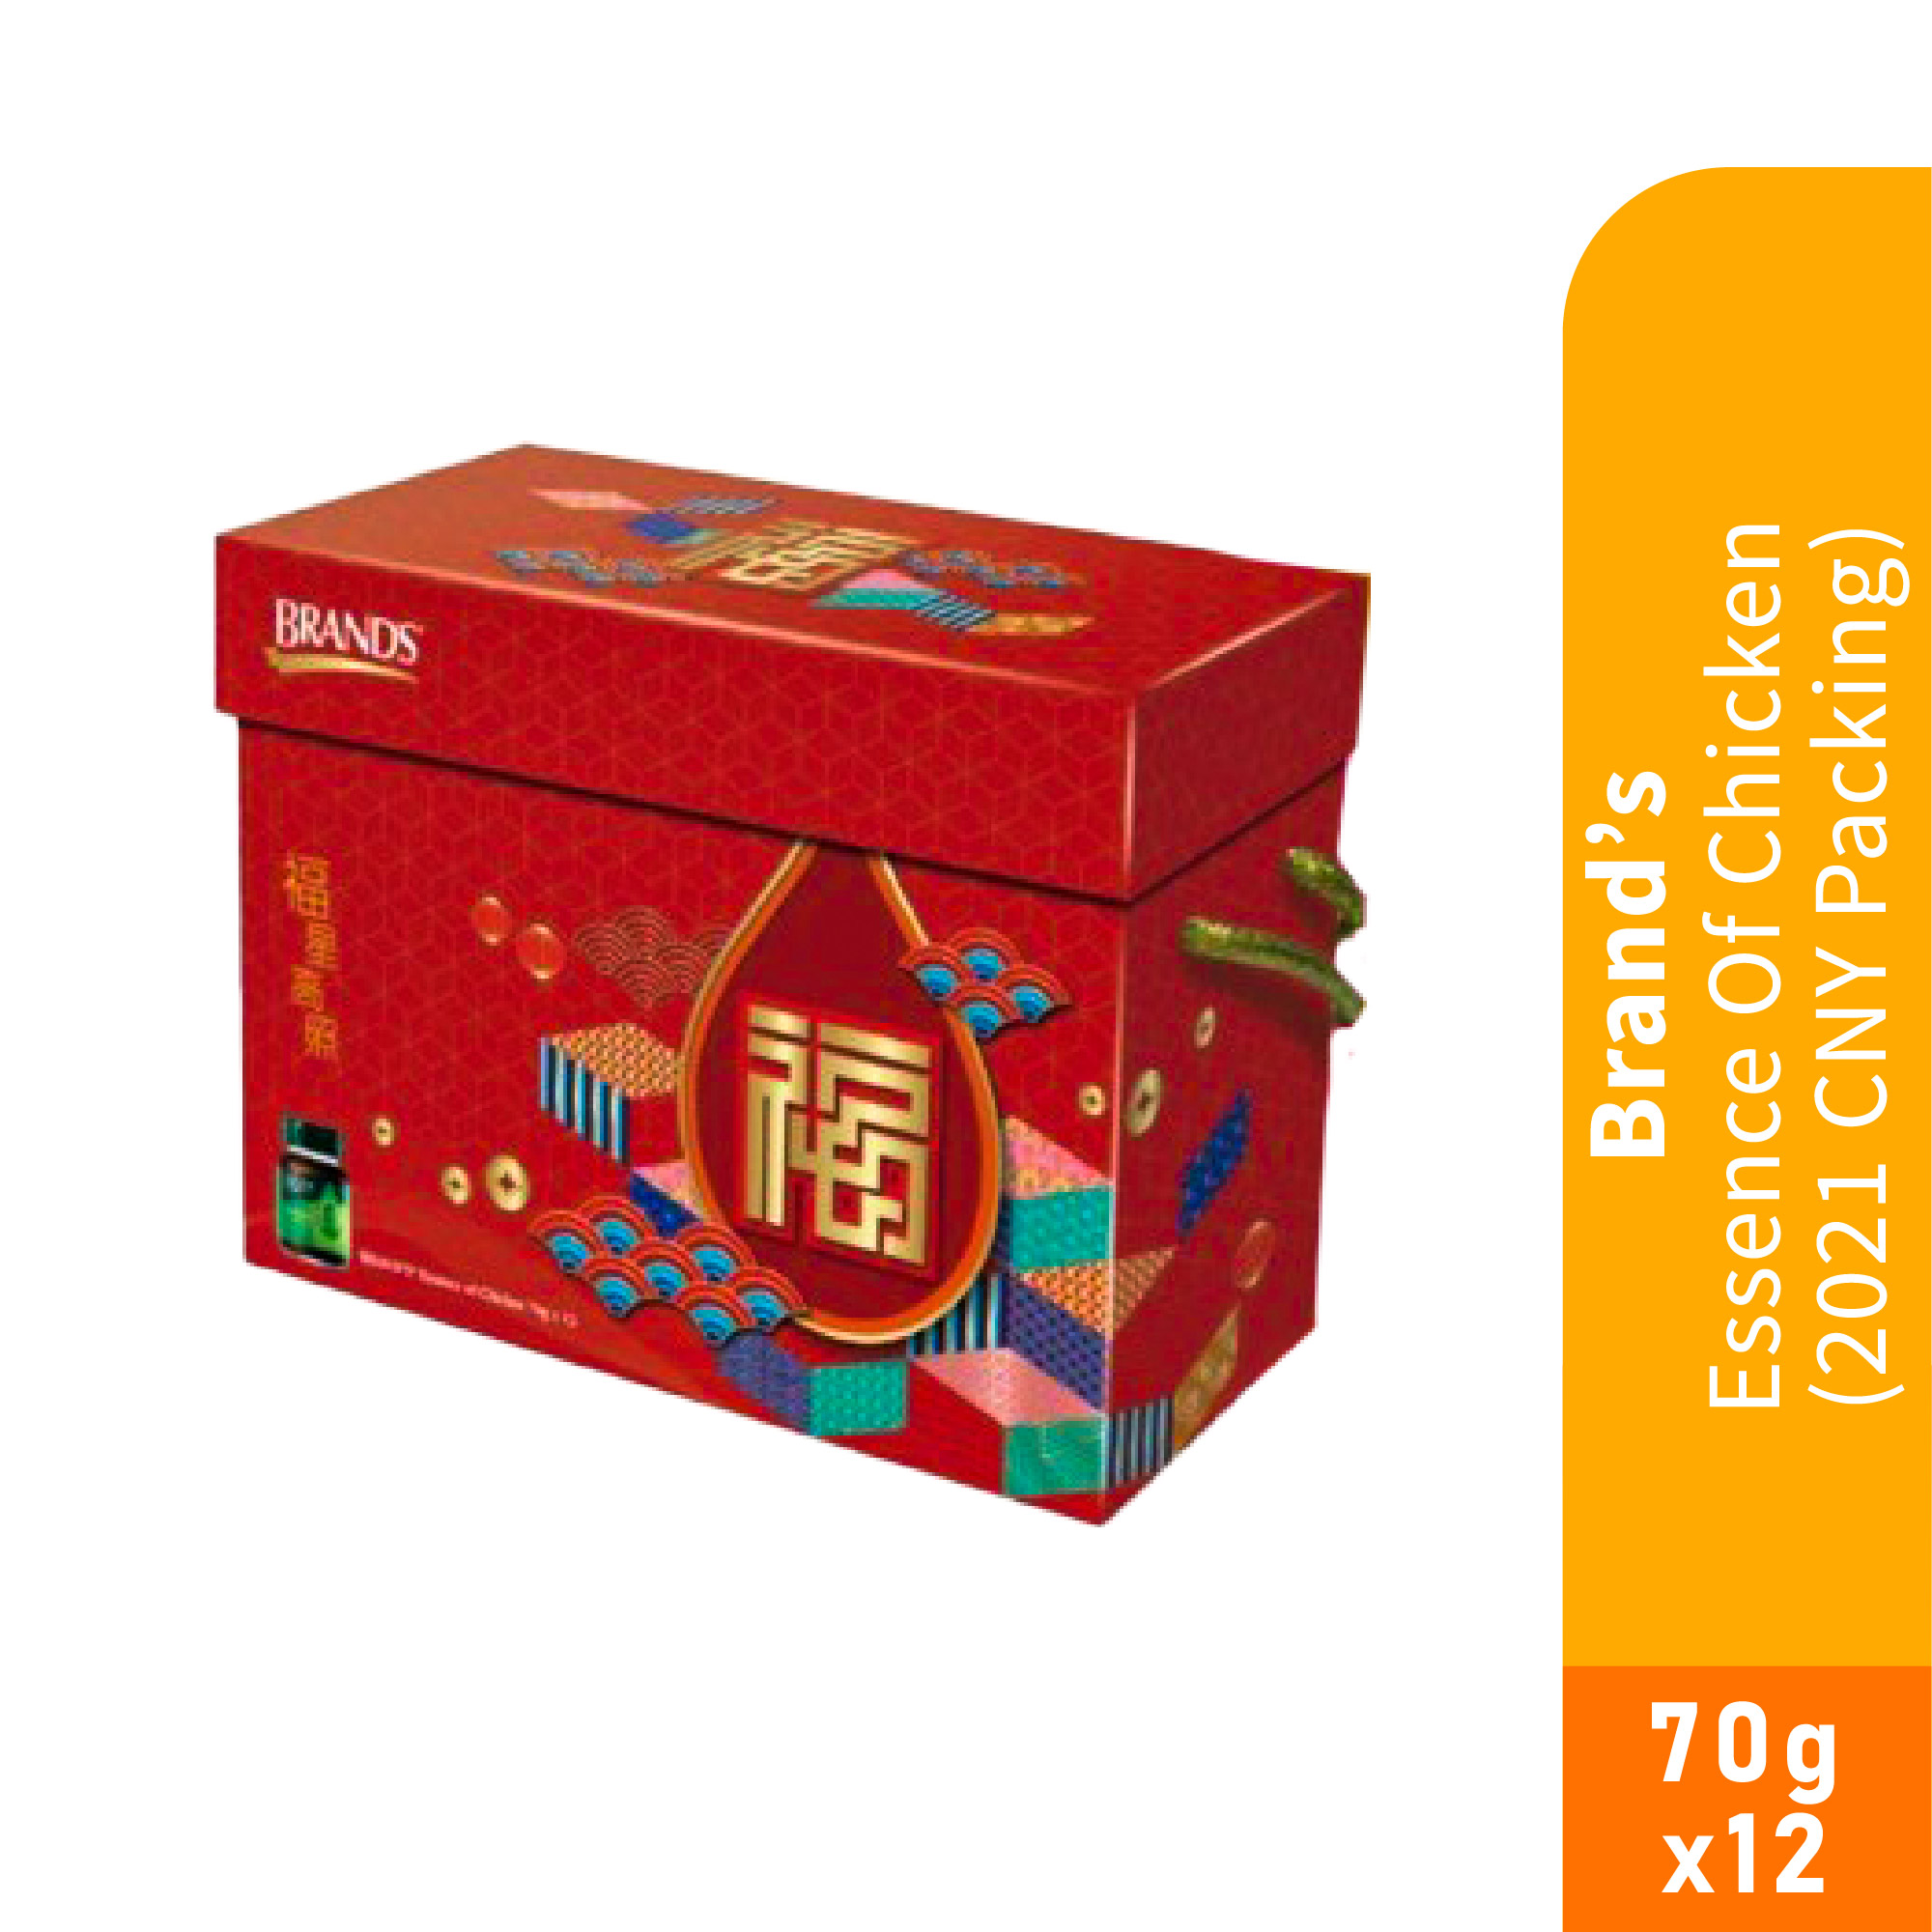 BRANDS Essence of Chicken 70g X 12's Gift Pack with High Protein Chicken Essence for Immune & Energy Booster (2021 CNY)